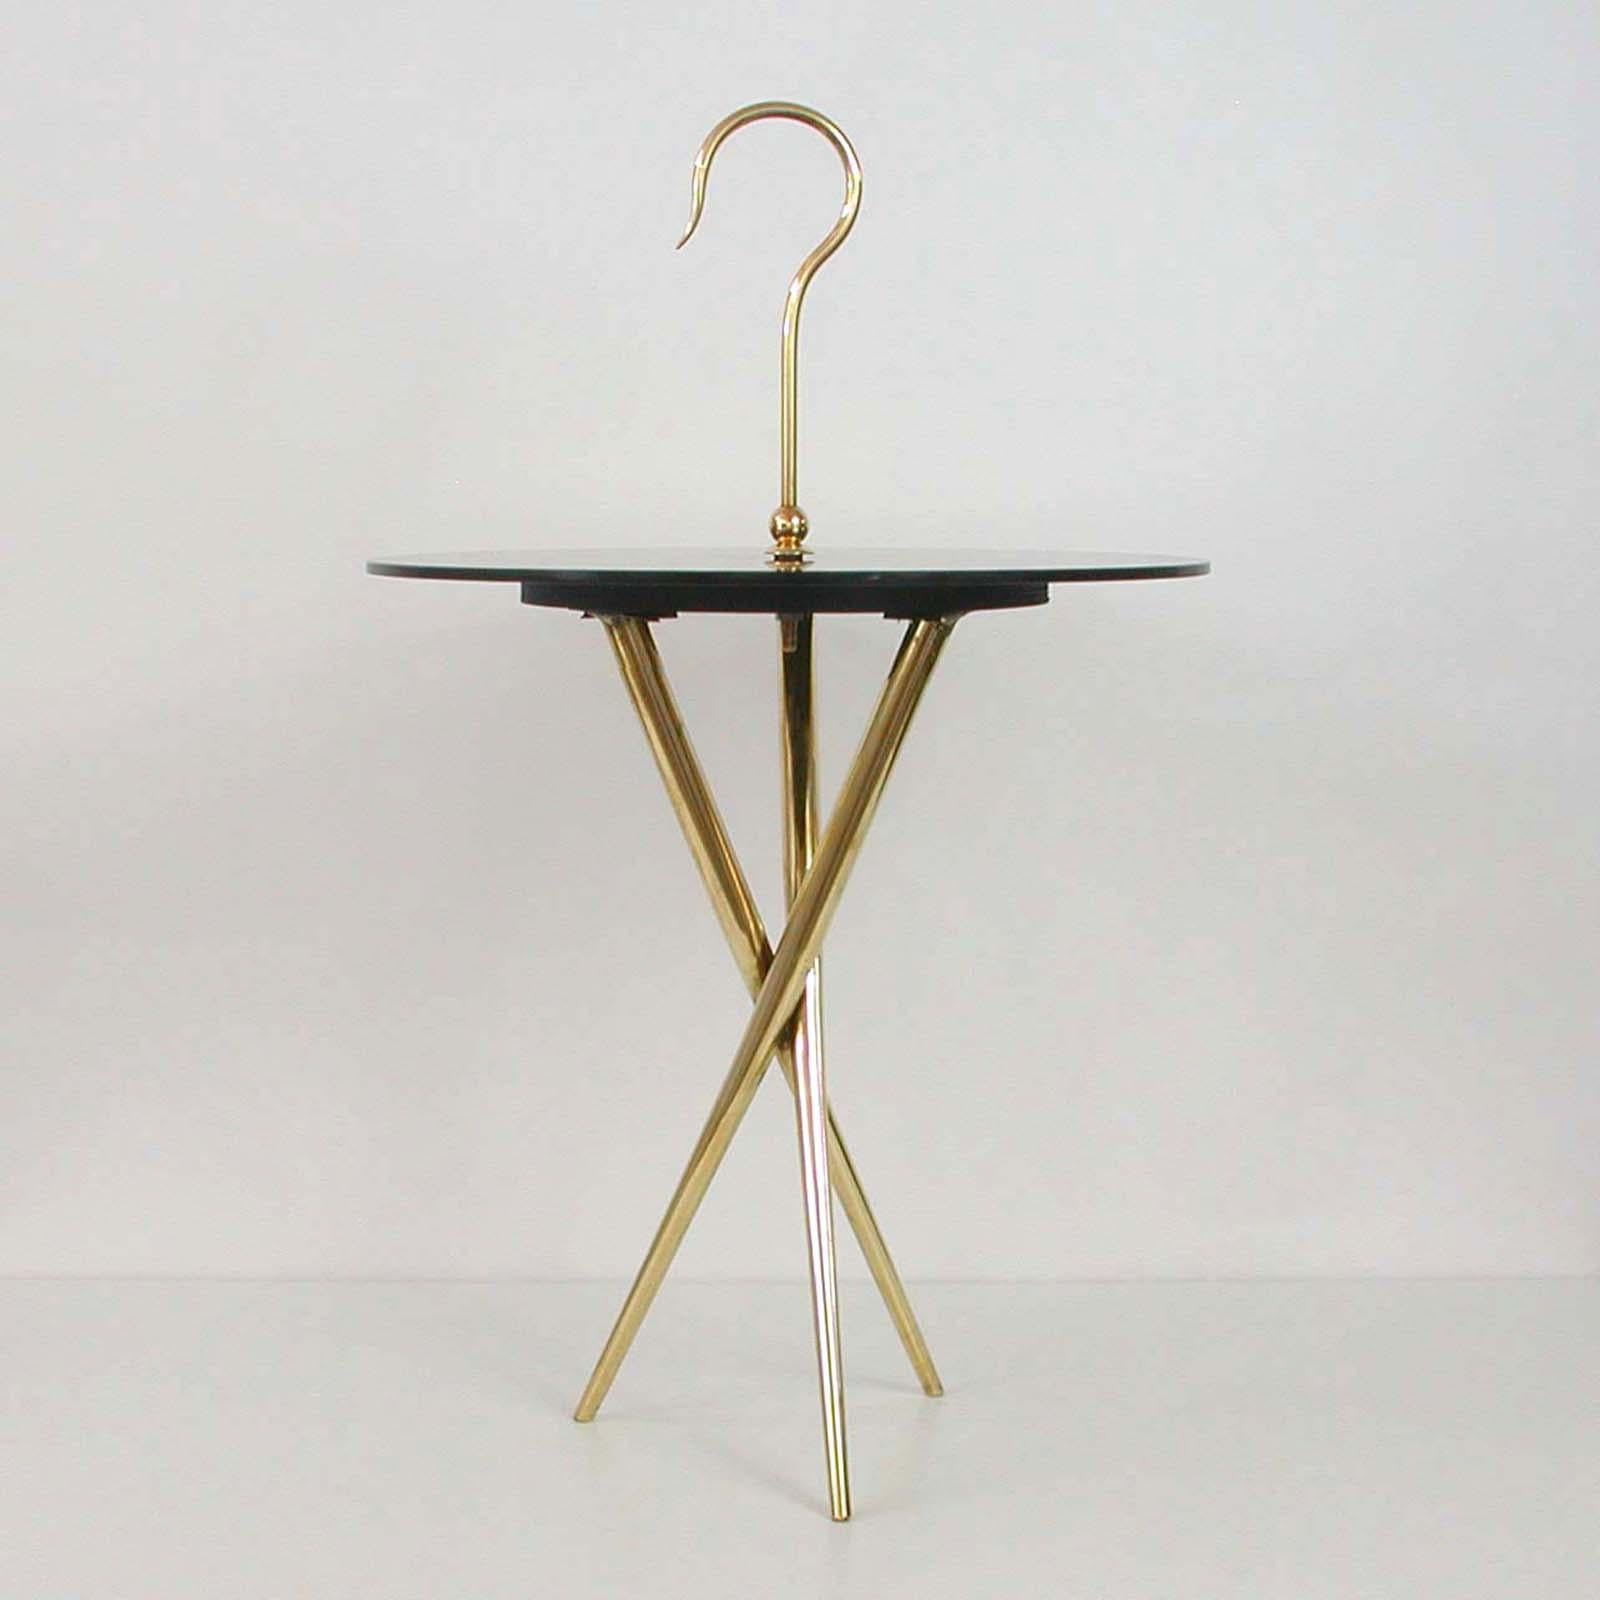 Italian Midcentury Brass and Tinted Glass Occasional Table, 1950s For Sale 3